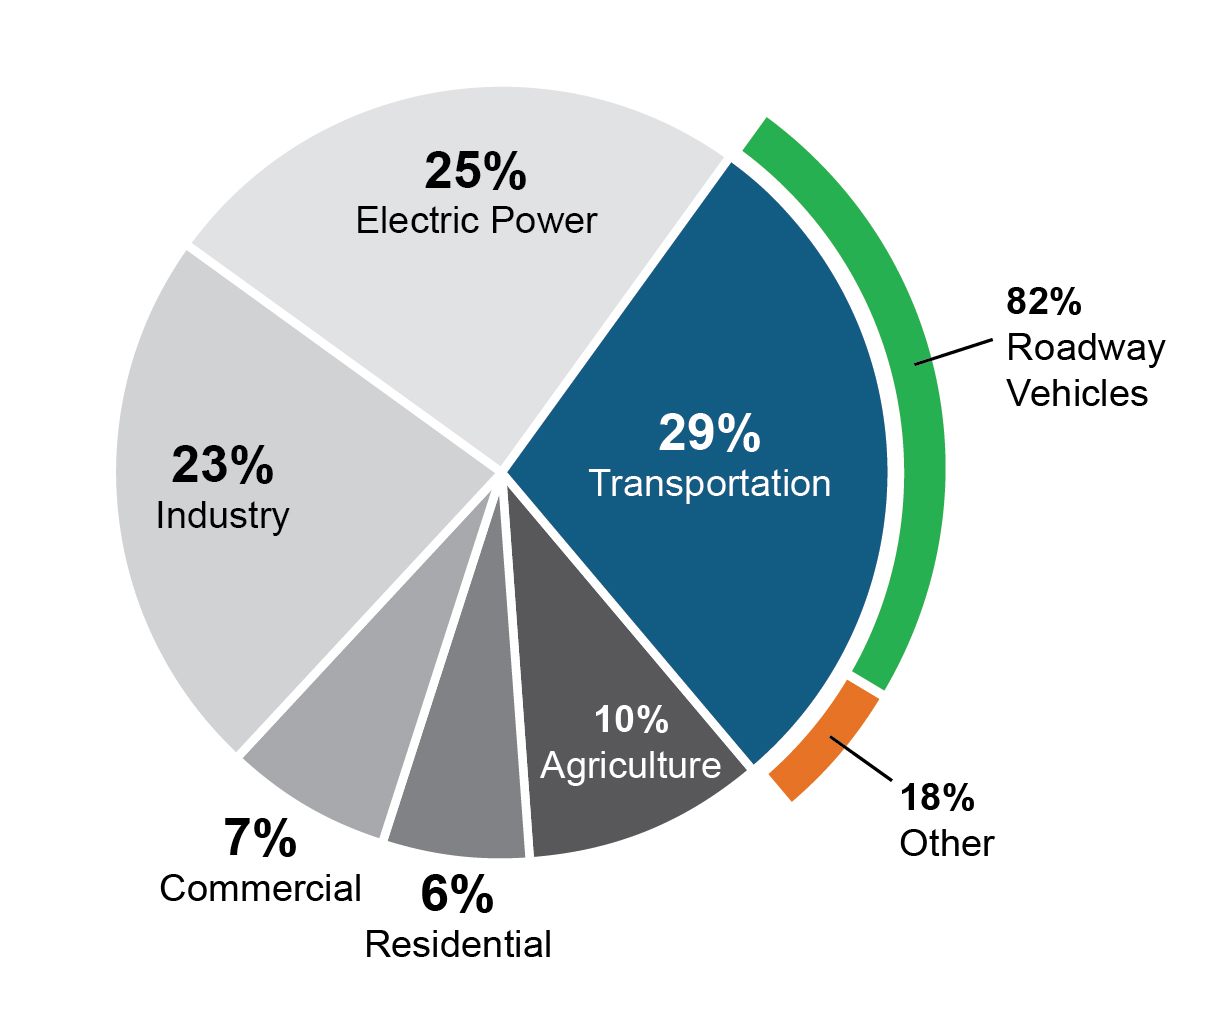 Graph indicates Transportation accounts for 29 percent of GHG emissions, and 82 percent of that is from roadway vehicles. In addition, 25% comes from Electric power, 23% from industry, 7% from Commercial, 6% from Residential, and 10% from Agriculture.